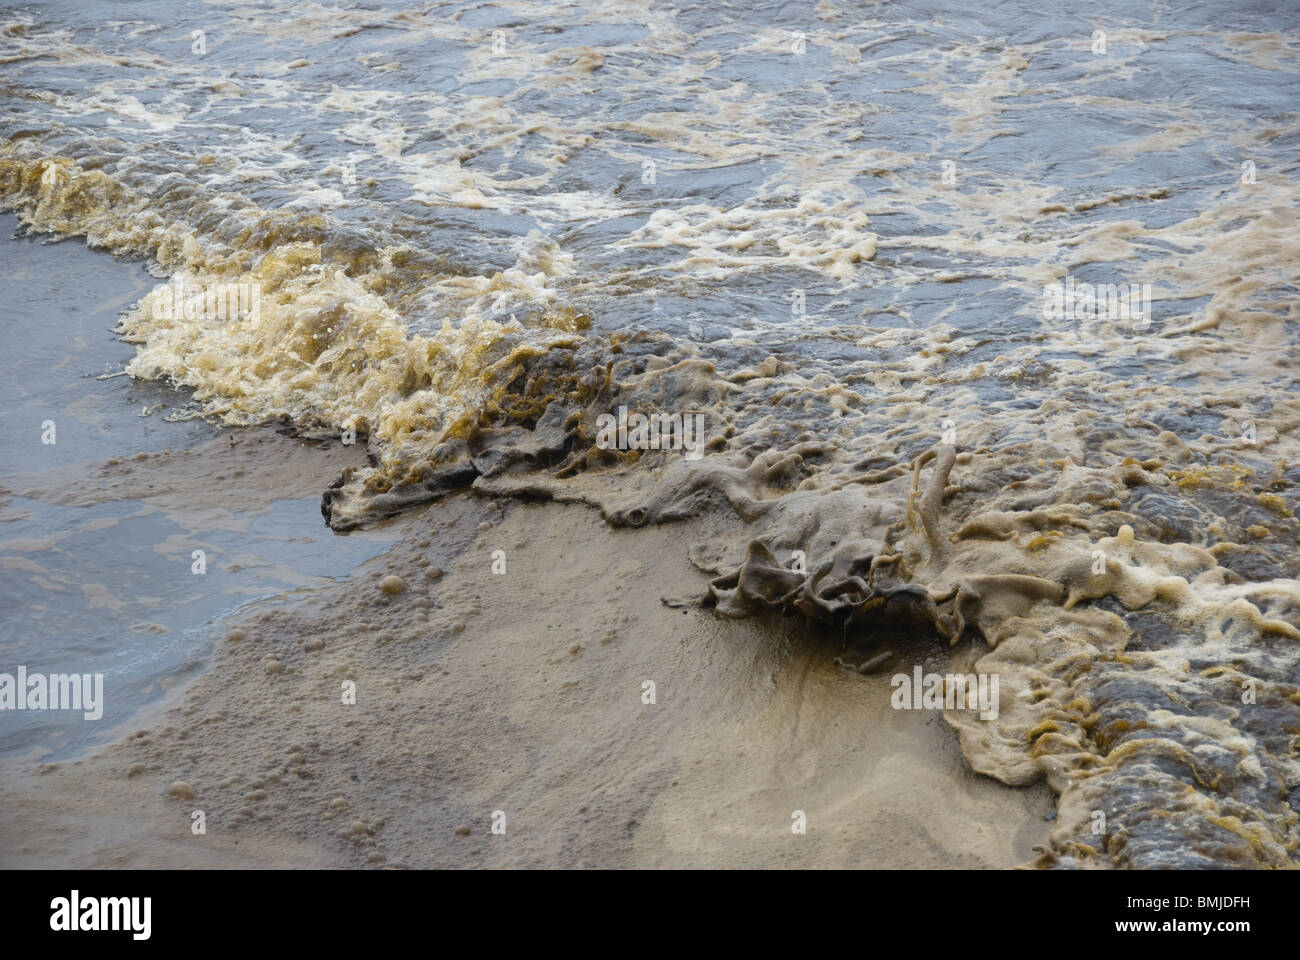 Oil mixes with sand and water causing unknown environmental damage. Stock Photo